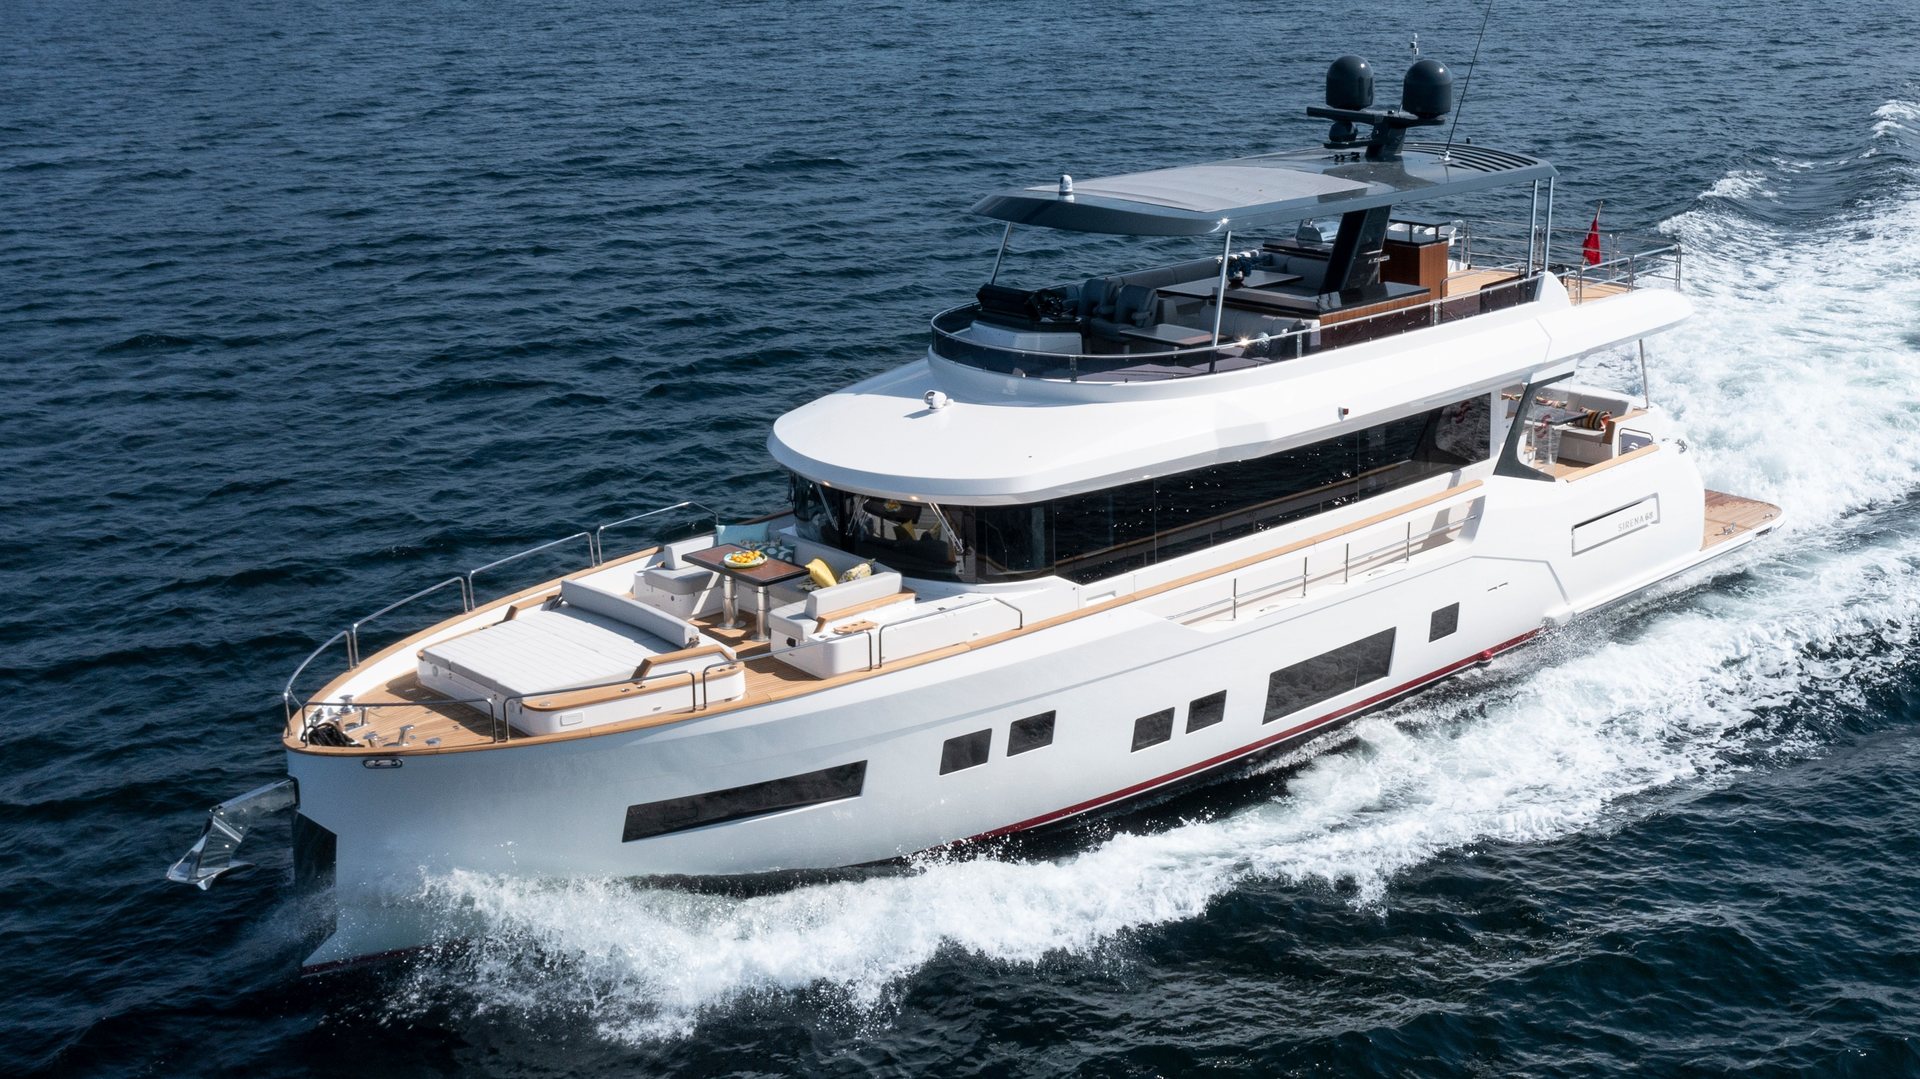 360 VR Virtual Tours of the Sirena 68